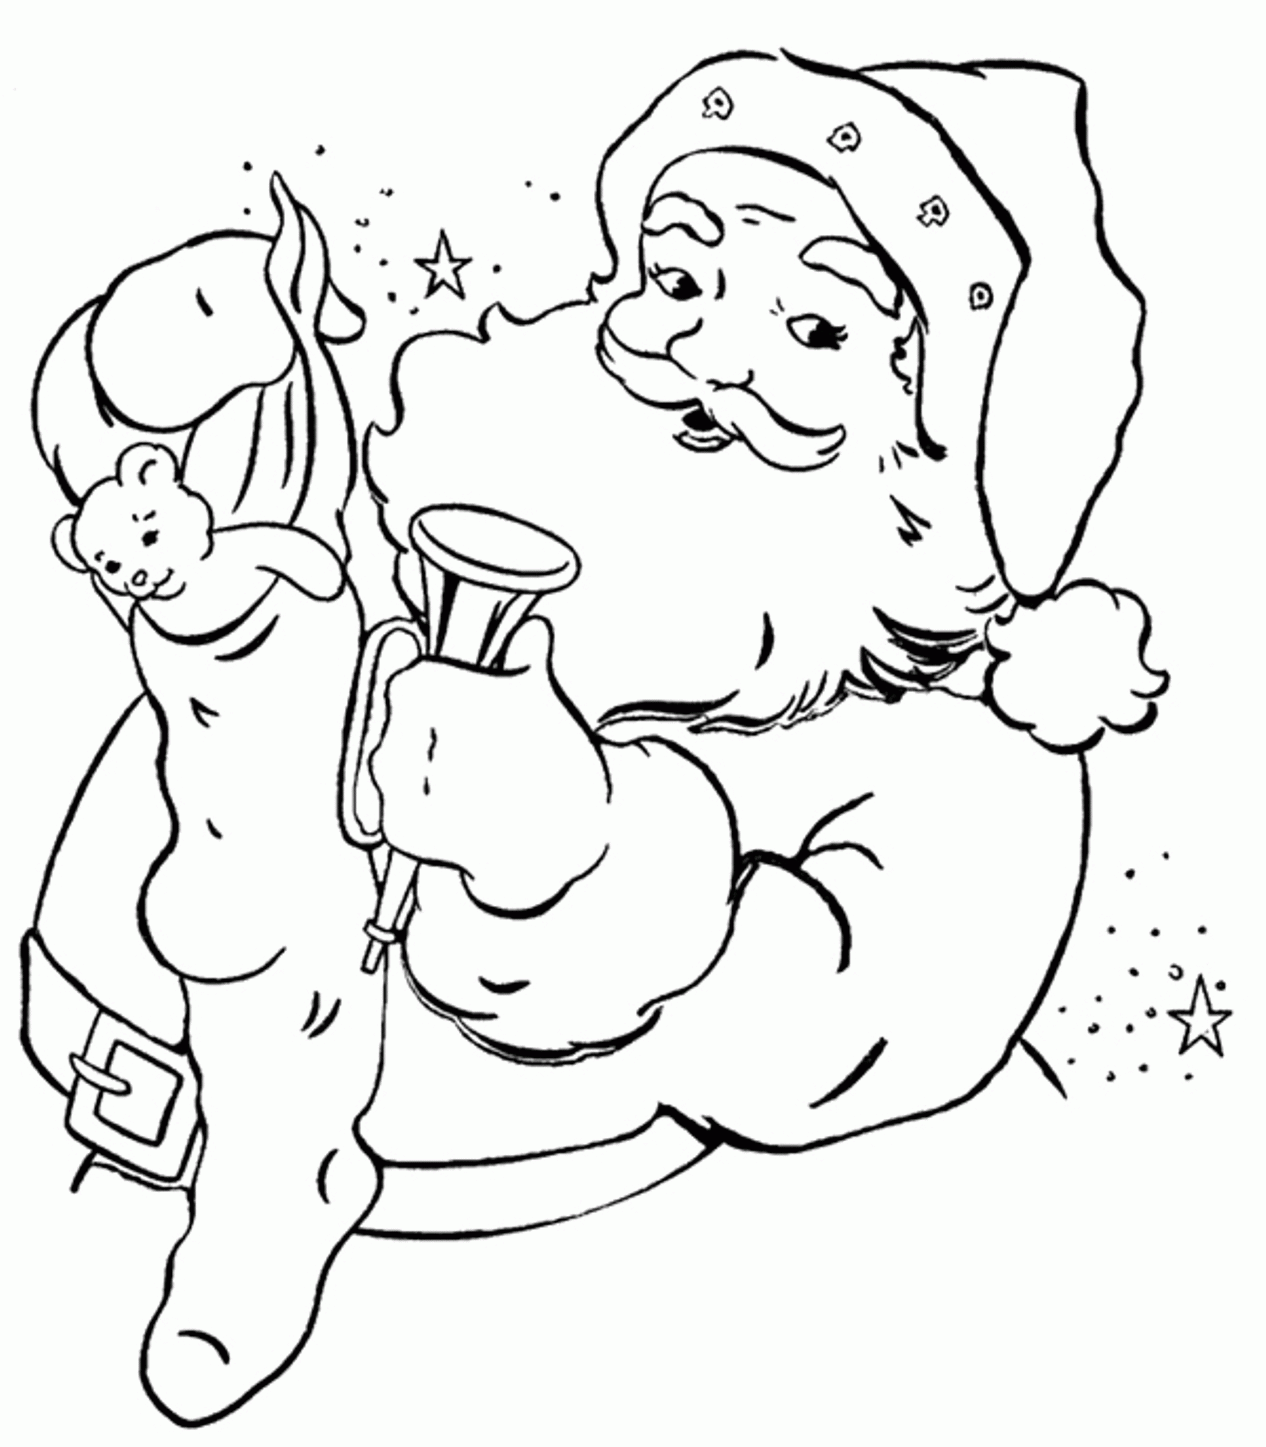 Stocking Present Santa Claus Coloring Pages | Christmas Coloring ...